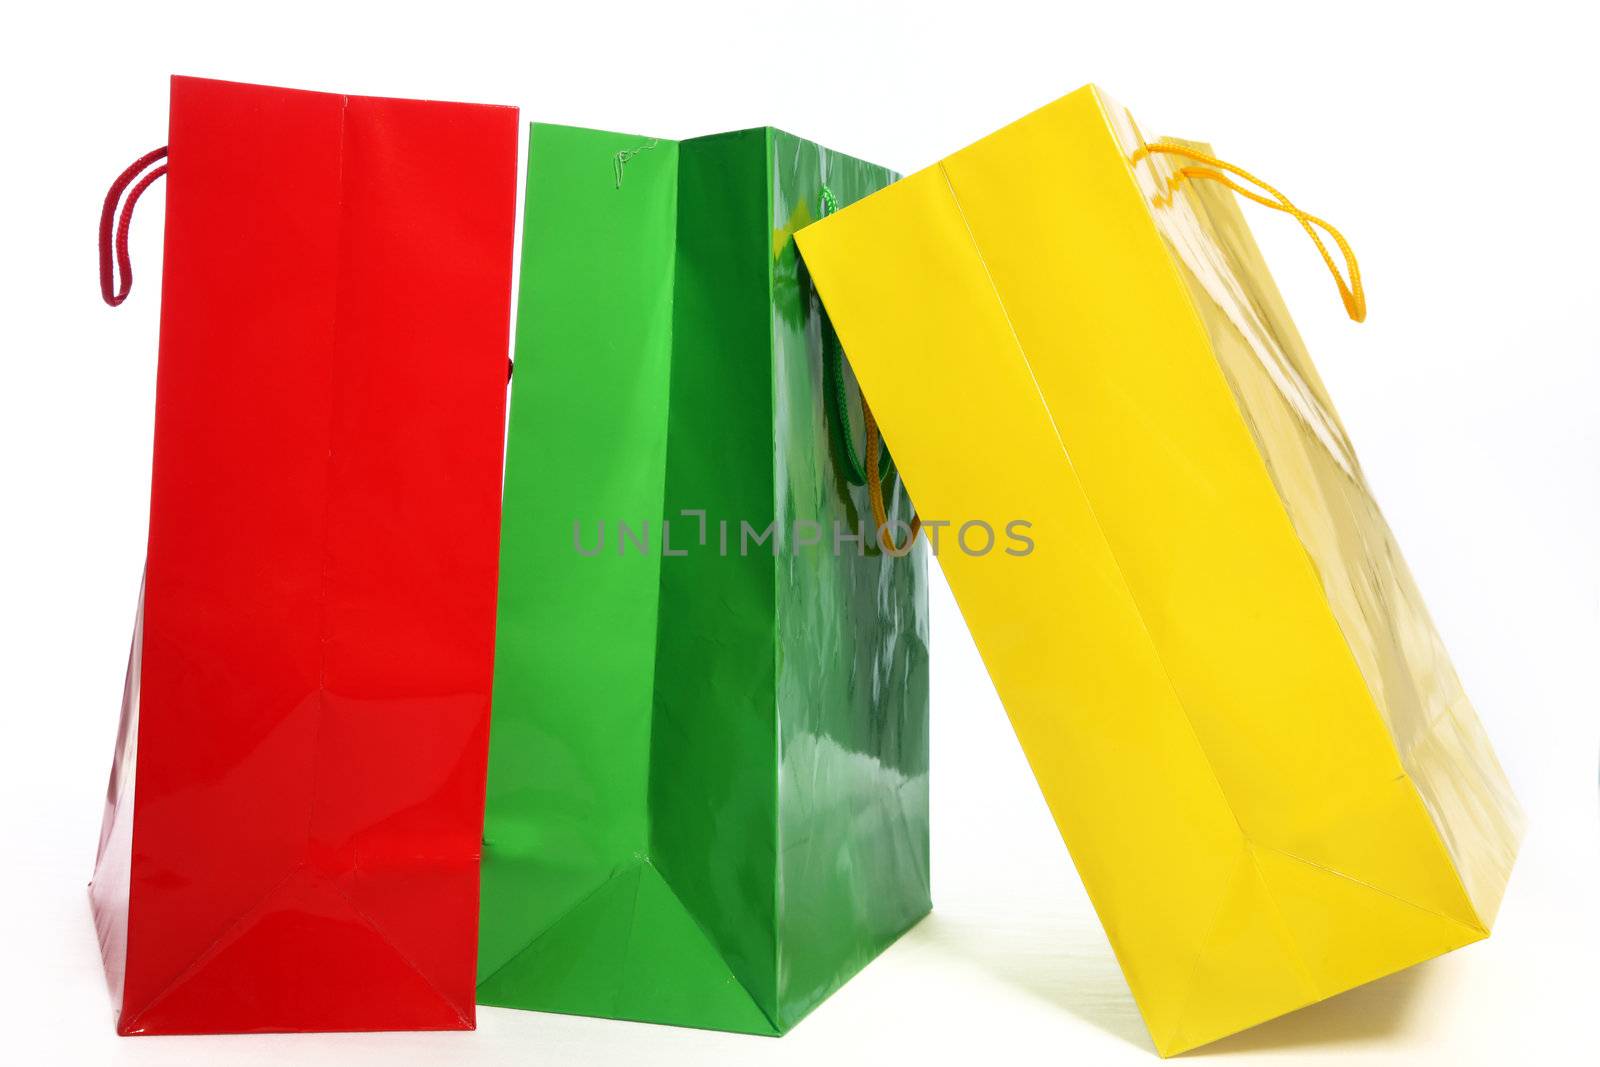 Three colourful paper shopping bags by Farina6000